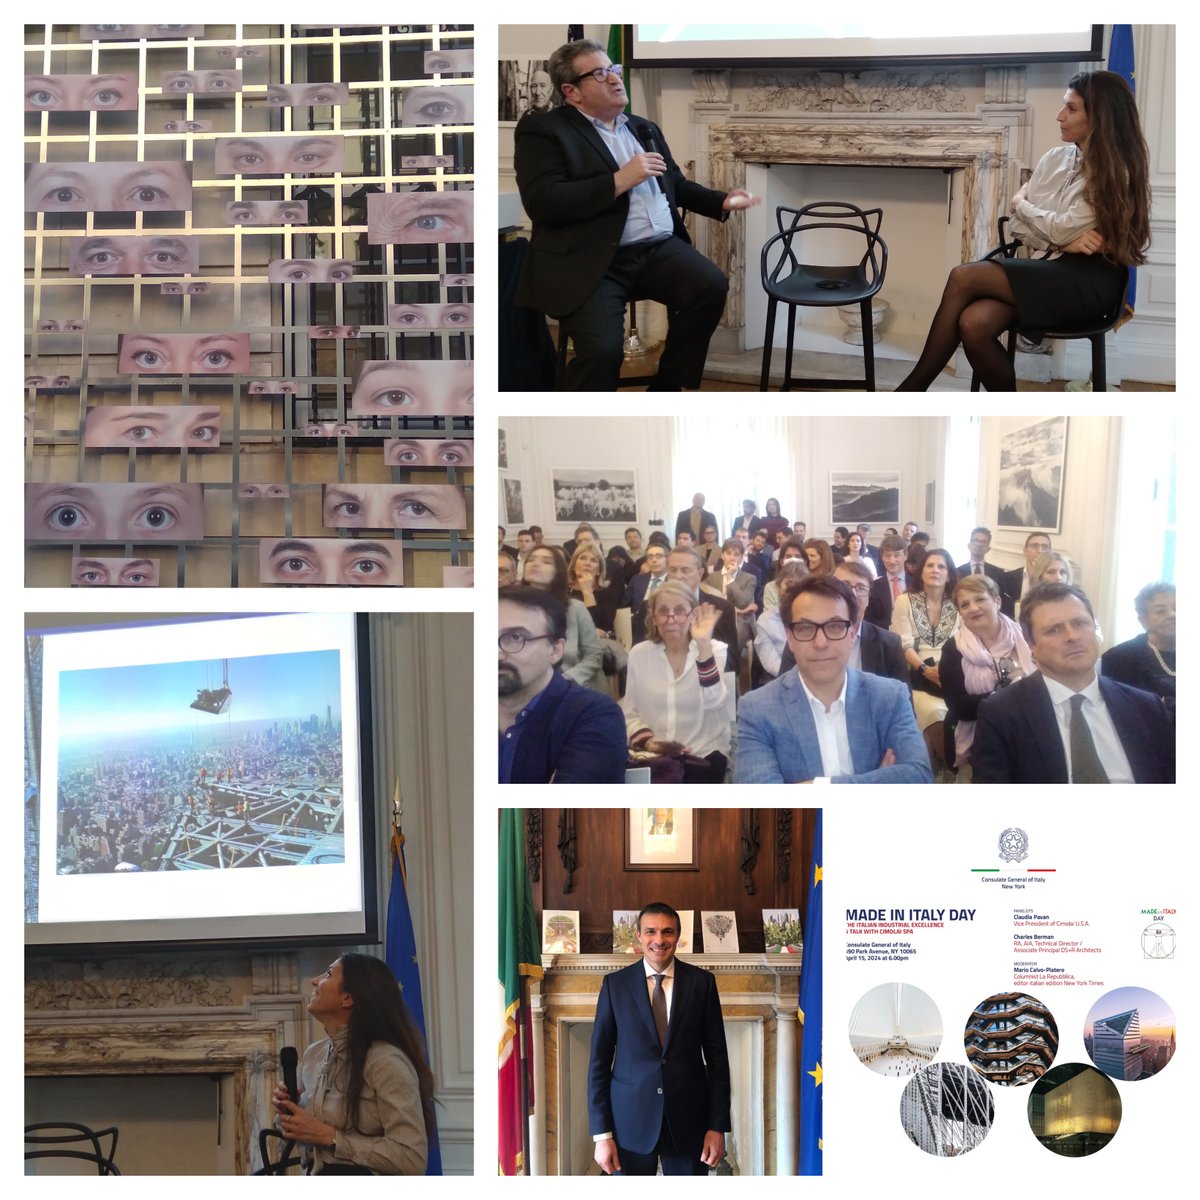 It was #AllEyesOnItaly at the Consulate of @ItalyinNY discussing Italy's industrial excellence. In the words of Claudia Pavan of #CimolaiUSA 'Italian manufacturing skills make your vision a reality'. @thevesselnyc & @TheShedNY @_HudsonYardsNYC are proof of that👏🇮🇹 @ItalyinUS